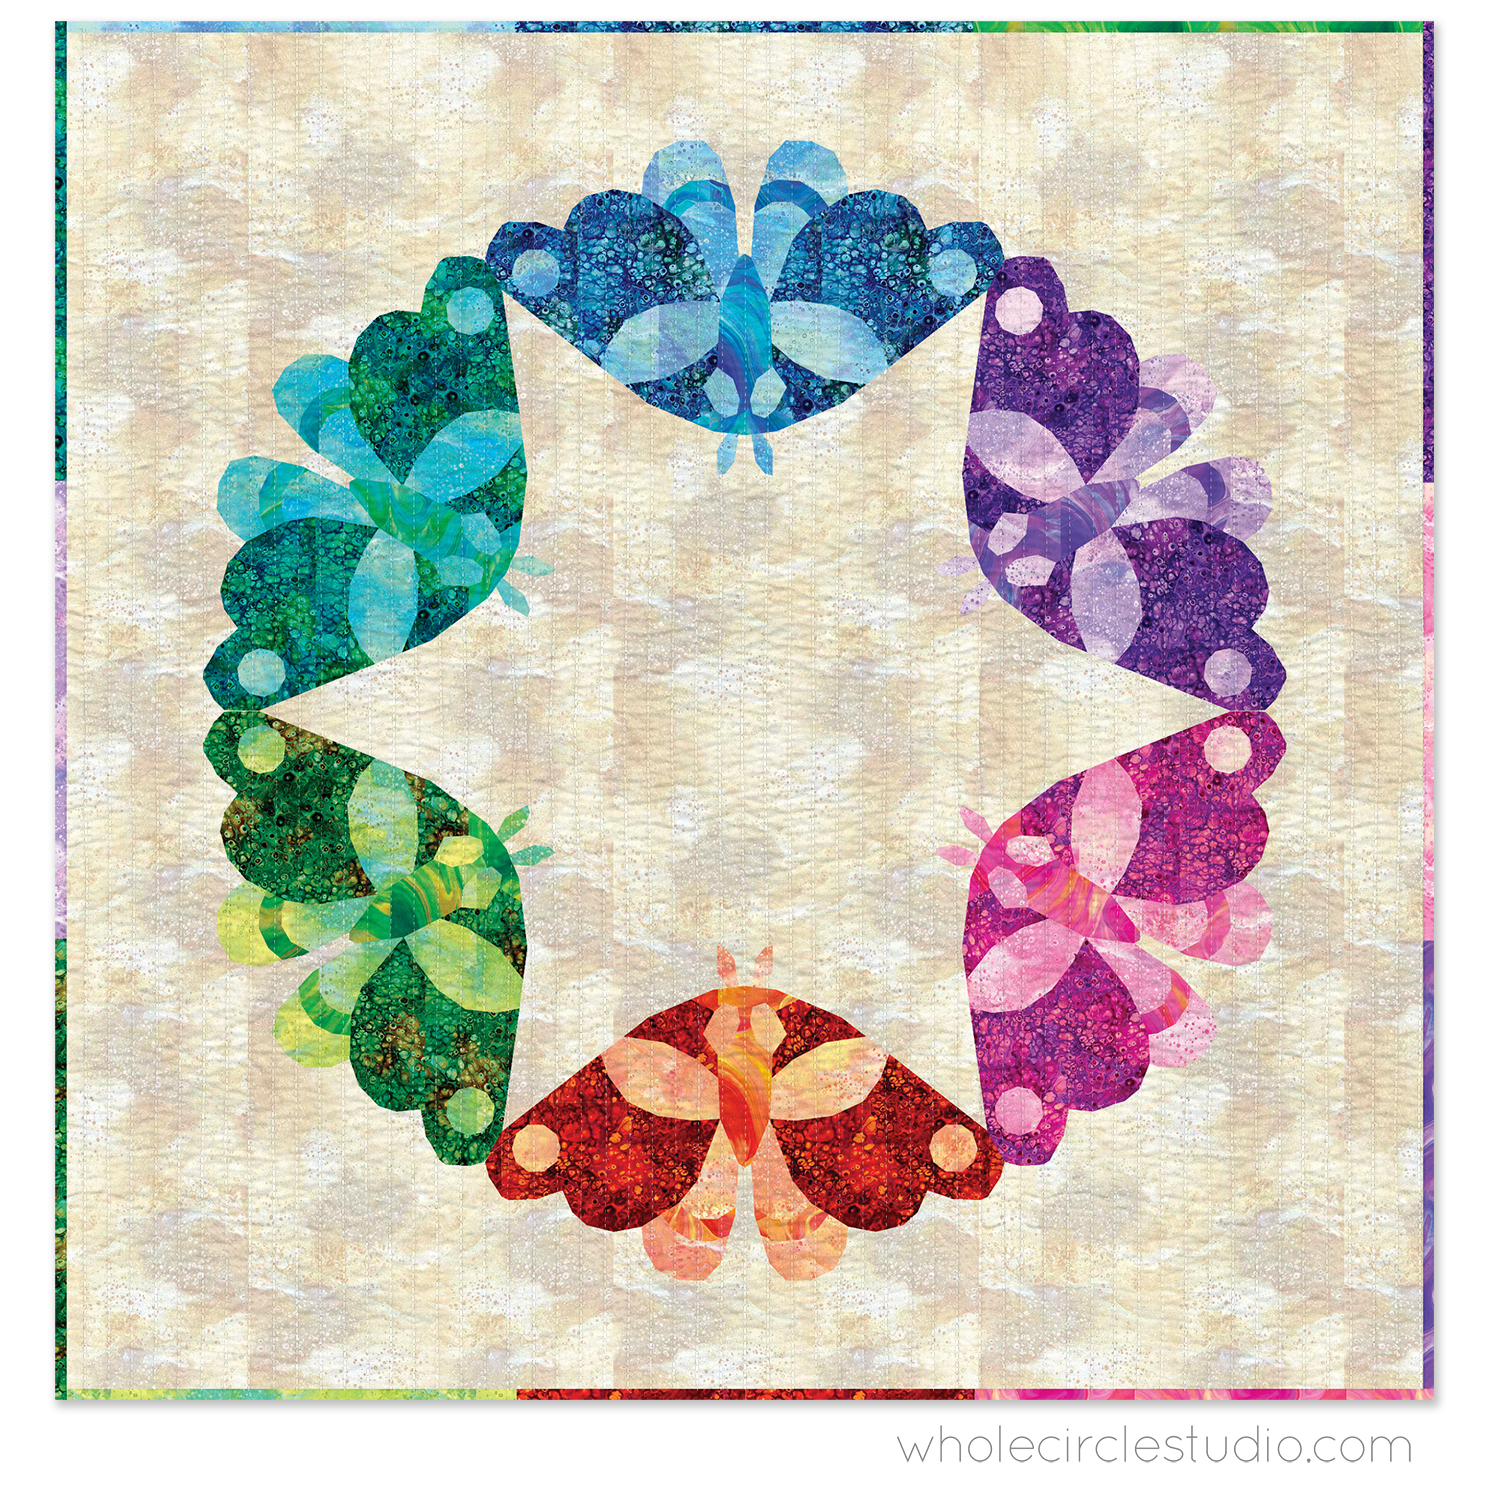 quilt with 6 colorful moths in a circle